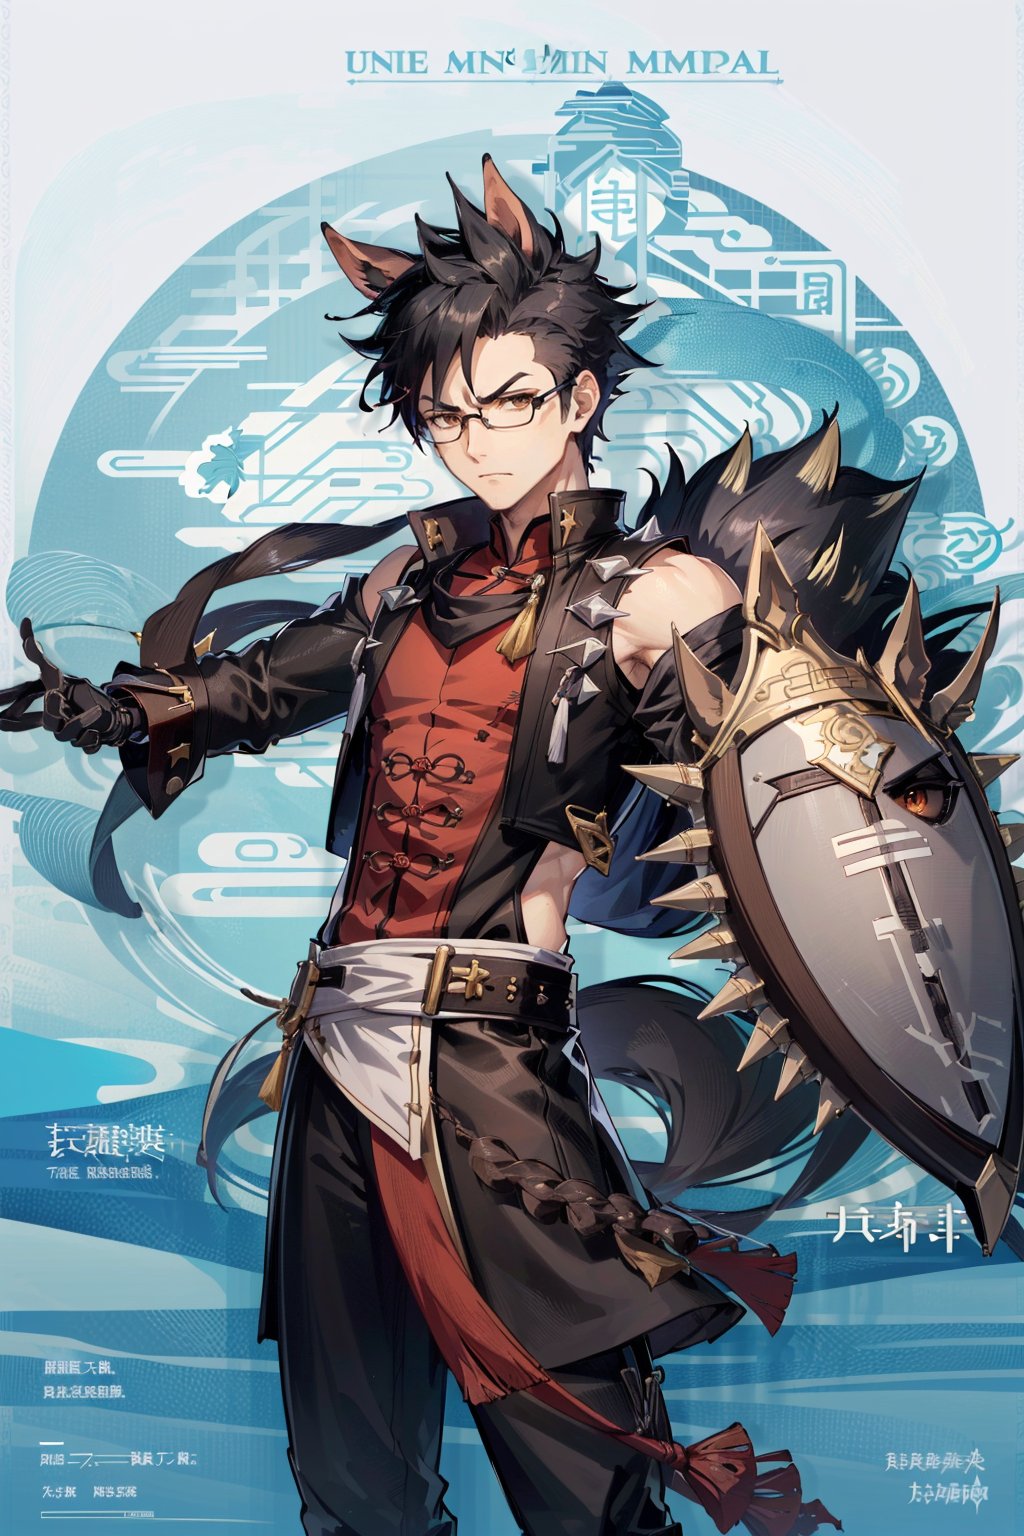 muscular mechanical body, ((1boy))((brown eyes, black-hair)), black leather coat,(( holding chinese blade and Shield)) ,midjourney portrait,swordsman,full_body, , 
,long skirt,line anime,(((animal ears, tail,male, horse ears,horse tail))),print robe,mature,annoyed,((( spiked hair,undercut))),glasses